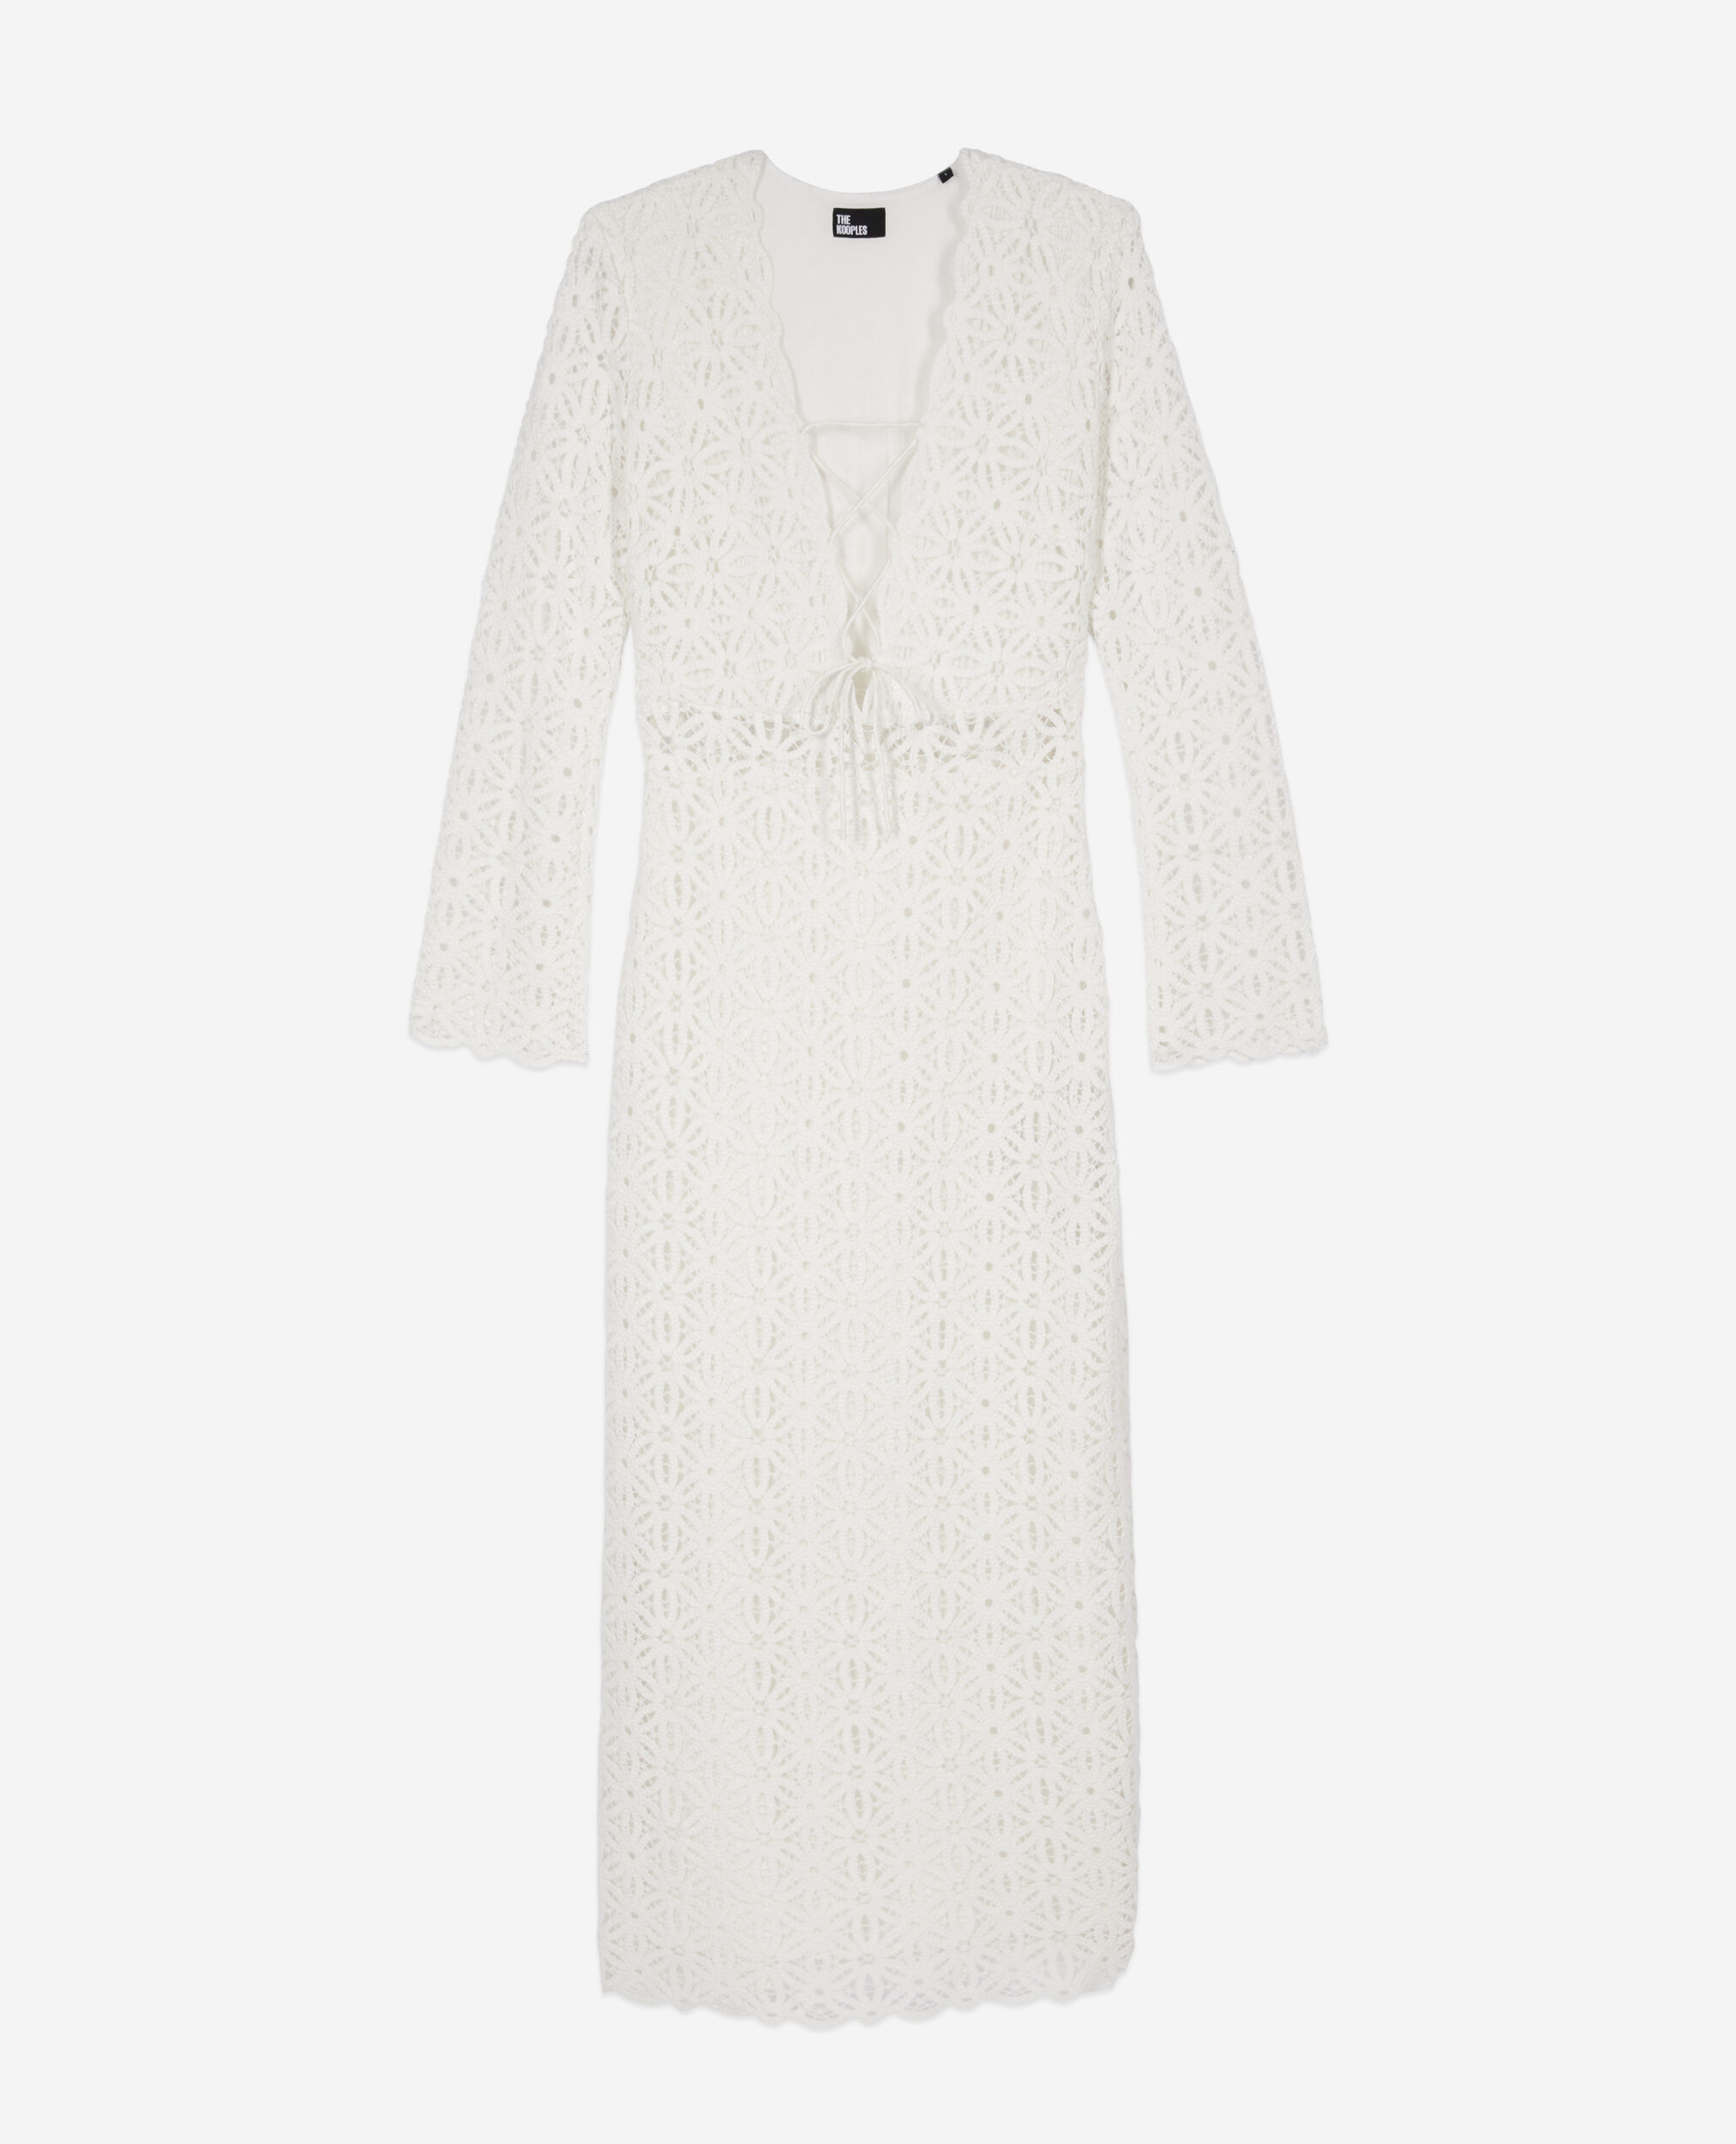 Robe longue blanche en guipure, WHITE, hi-res image number null